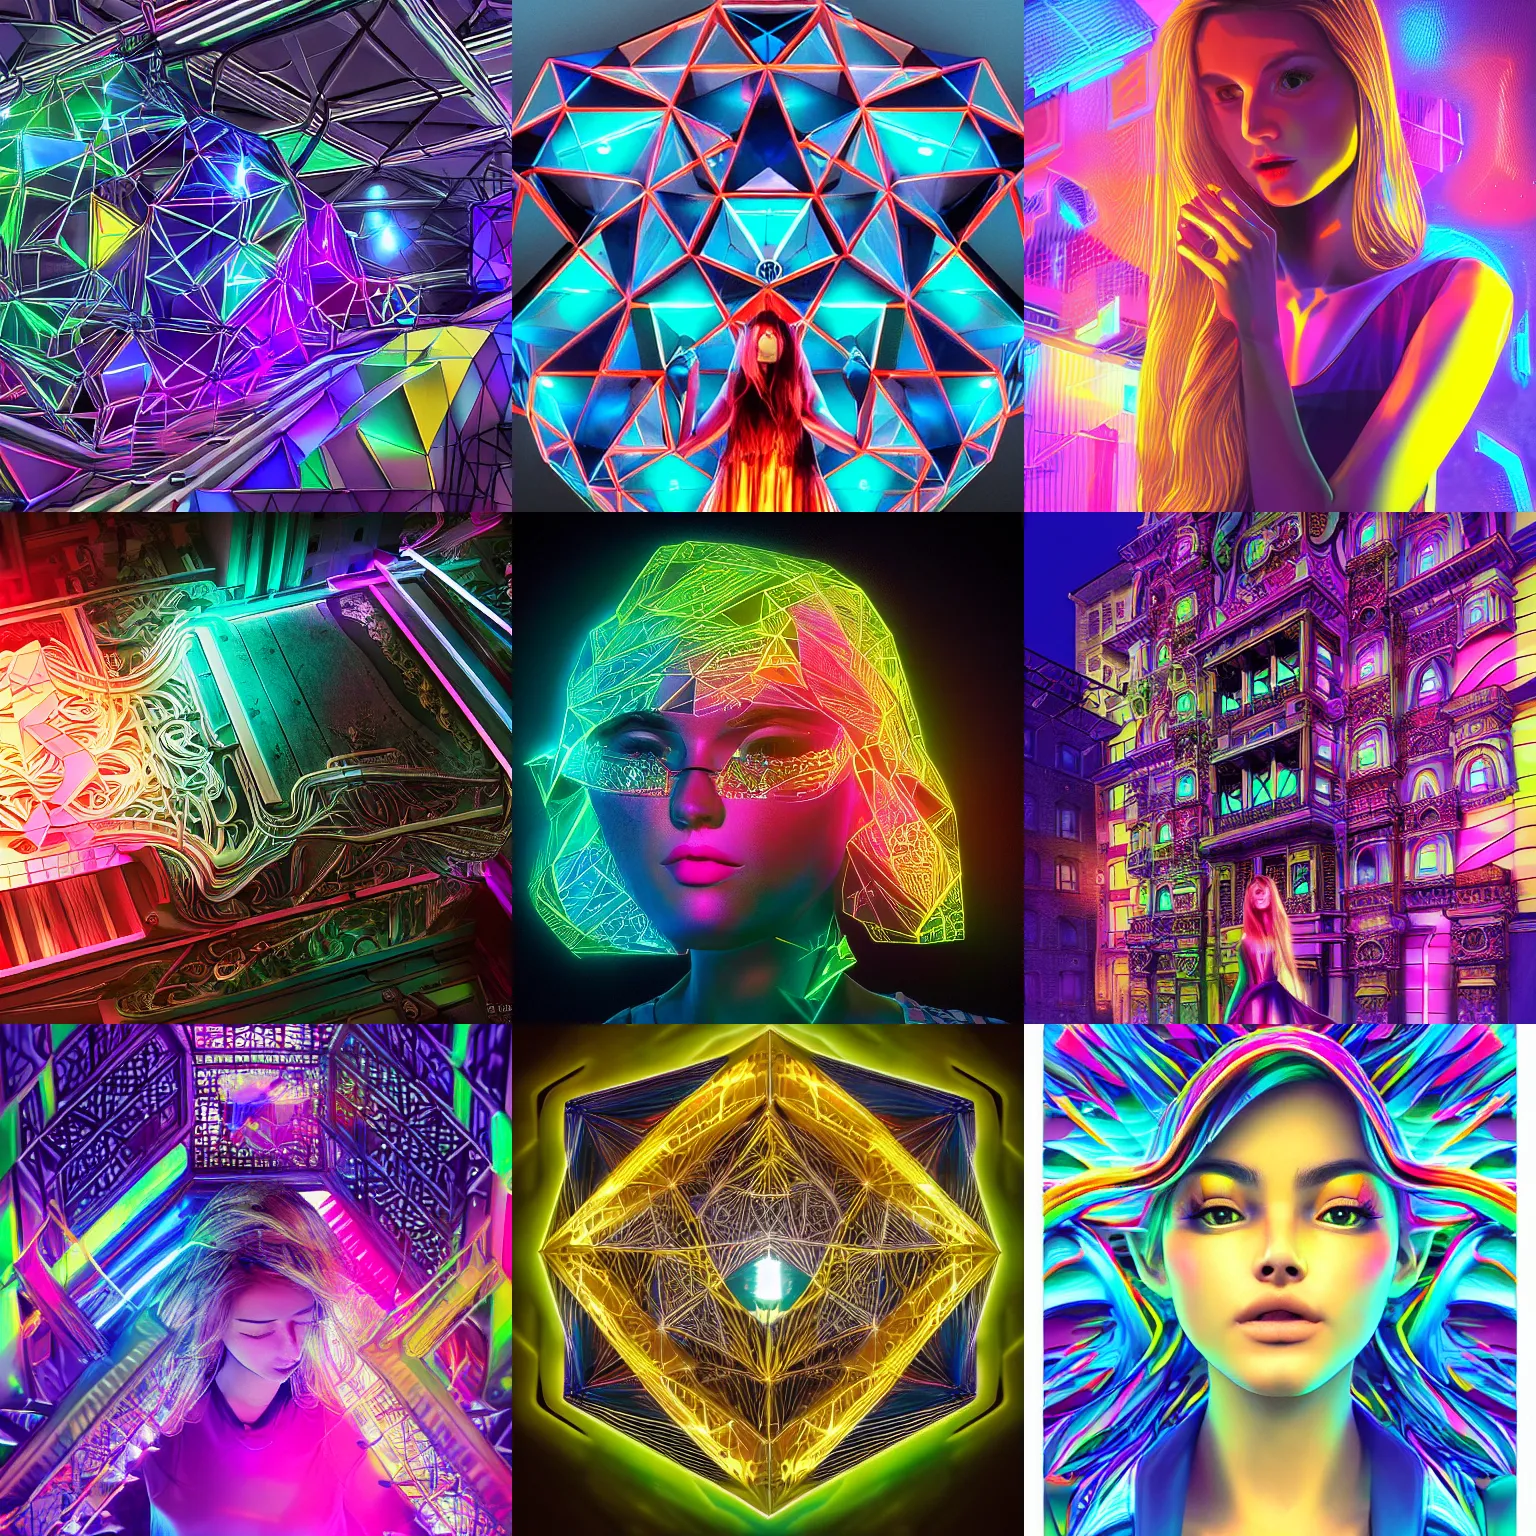 Prompt: young girl, Electric Colors, Megapixel, Bifrustum, Hyperoctahedron, Geometric, Exterior, Refreshing, Ternary, Floodlight, Electroluminescent Display, volumetric Light, insanely detailed and intricate, hypermaximalist, elegant, ornate, hyper realistic, super detailed